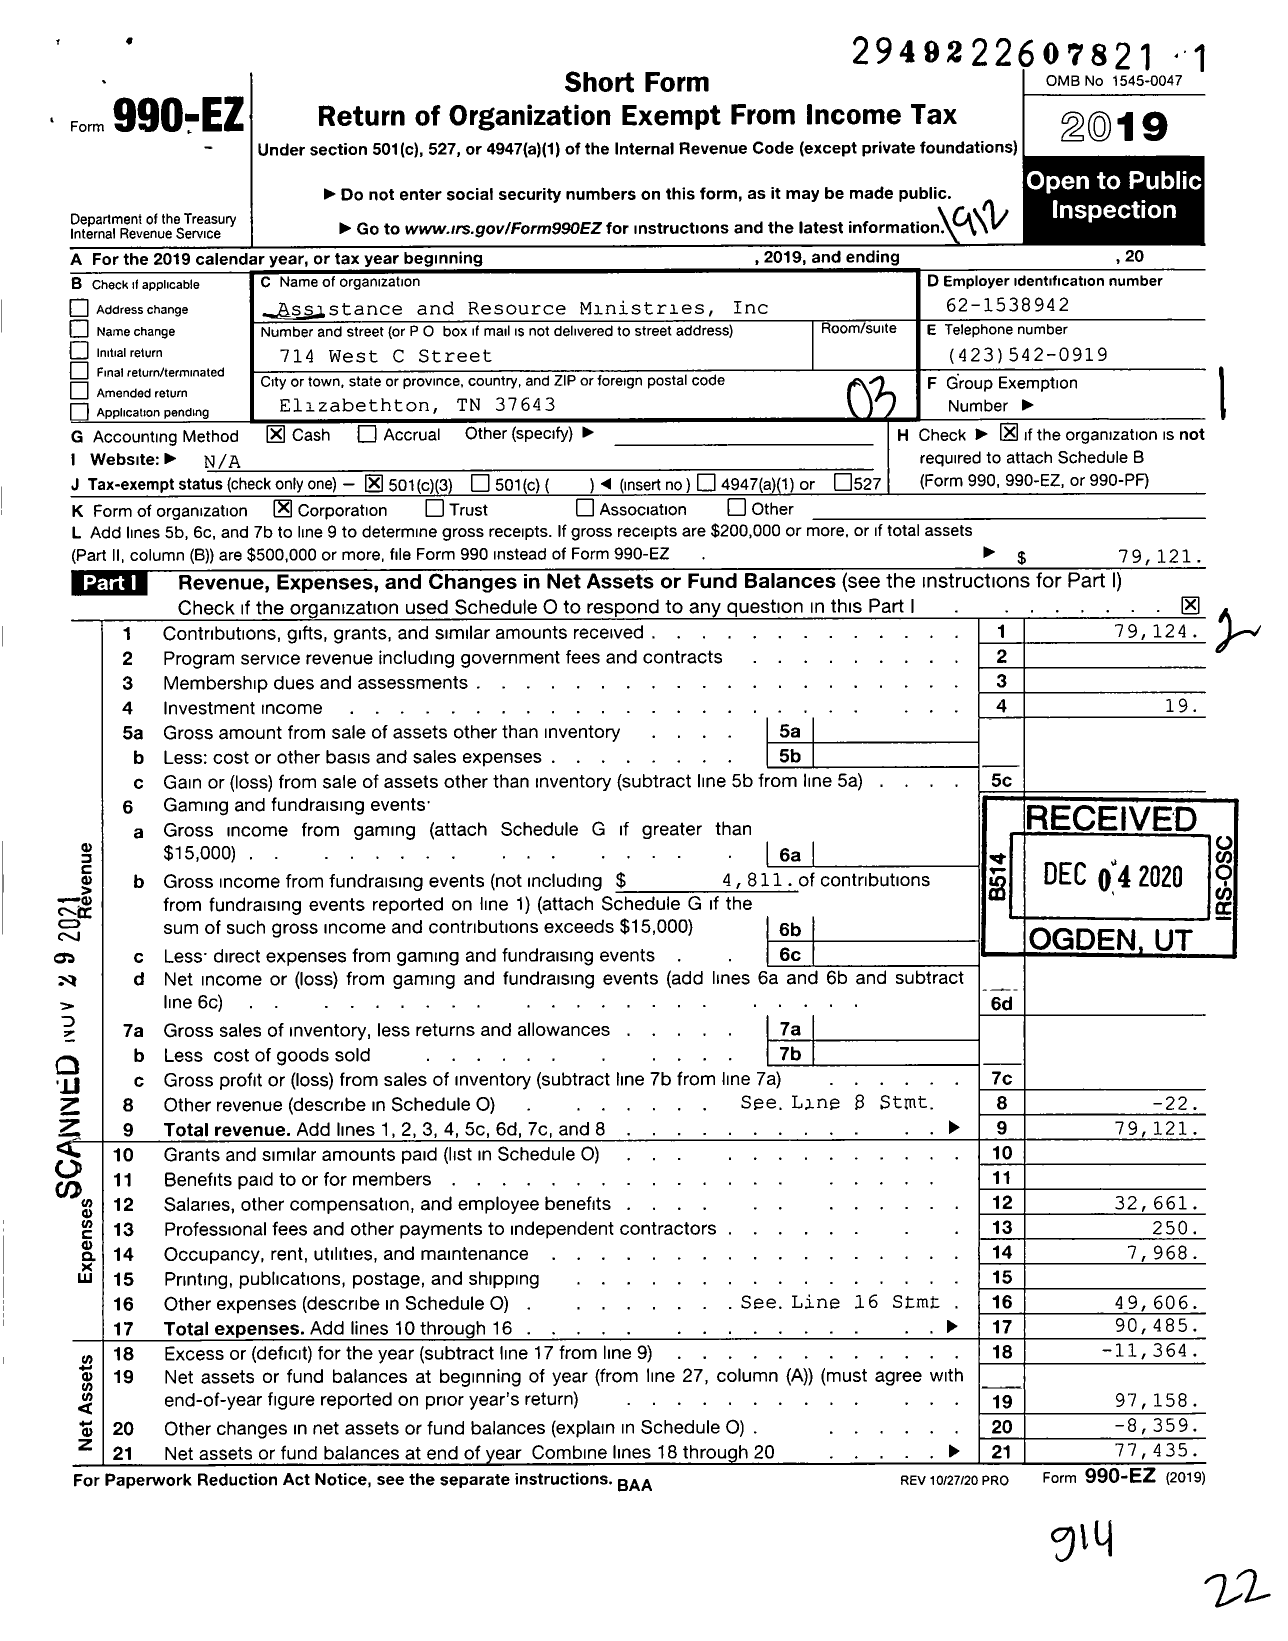 Image of first page of 2019 Form 990EZ for Assistance and Resource Ministries